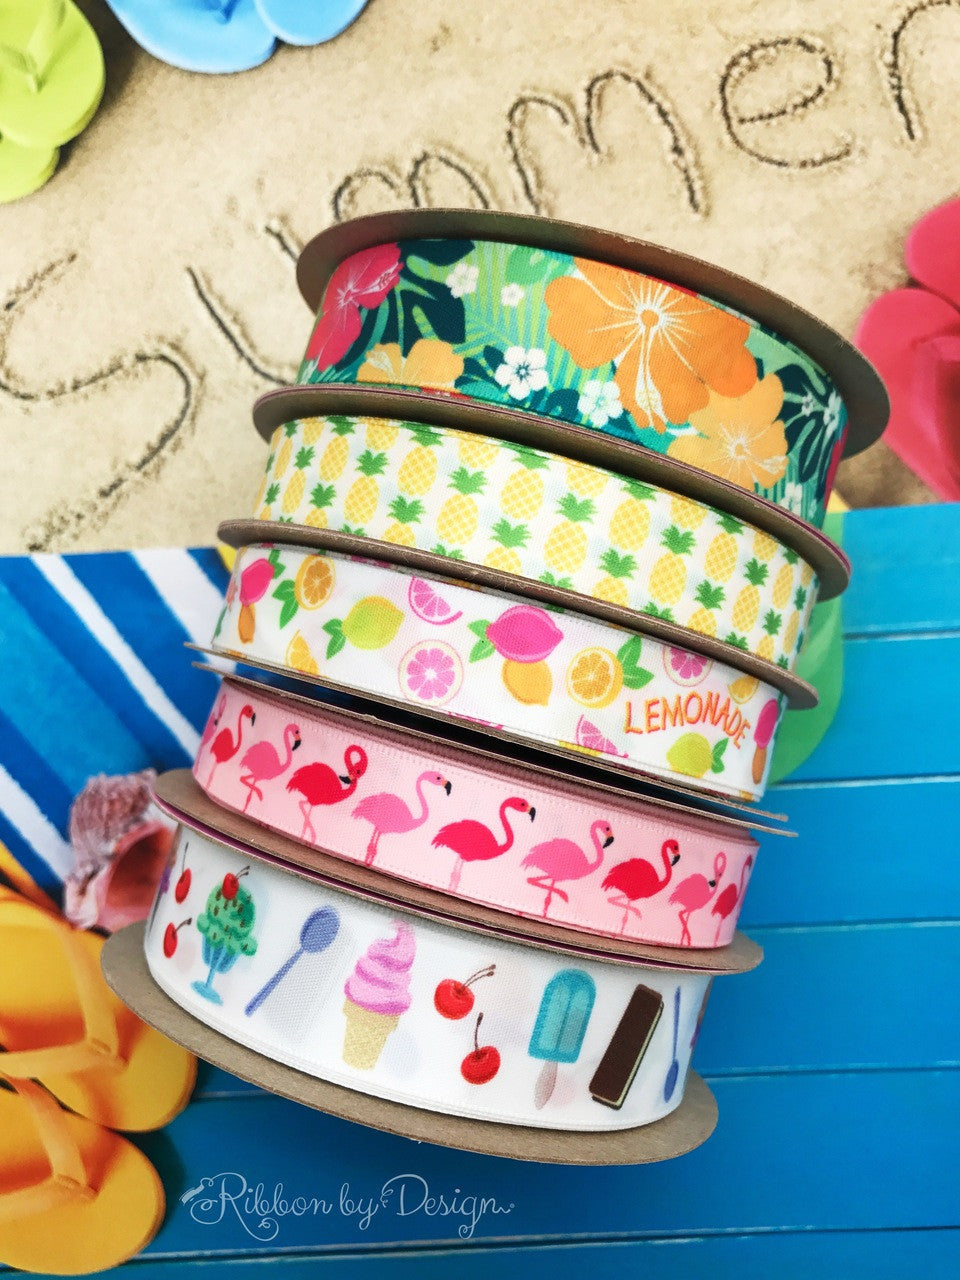 Combine our Summer themed ribbons to be ready for any Summer soiree that may come your way!